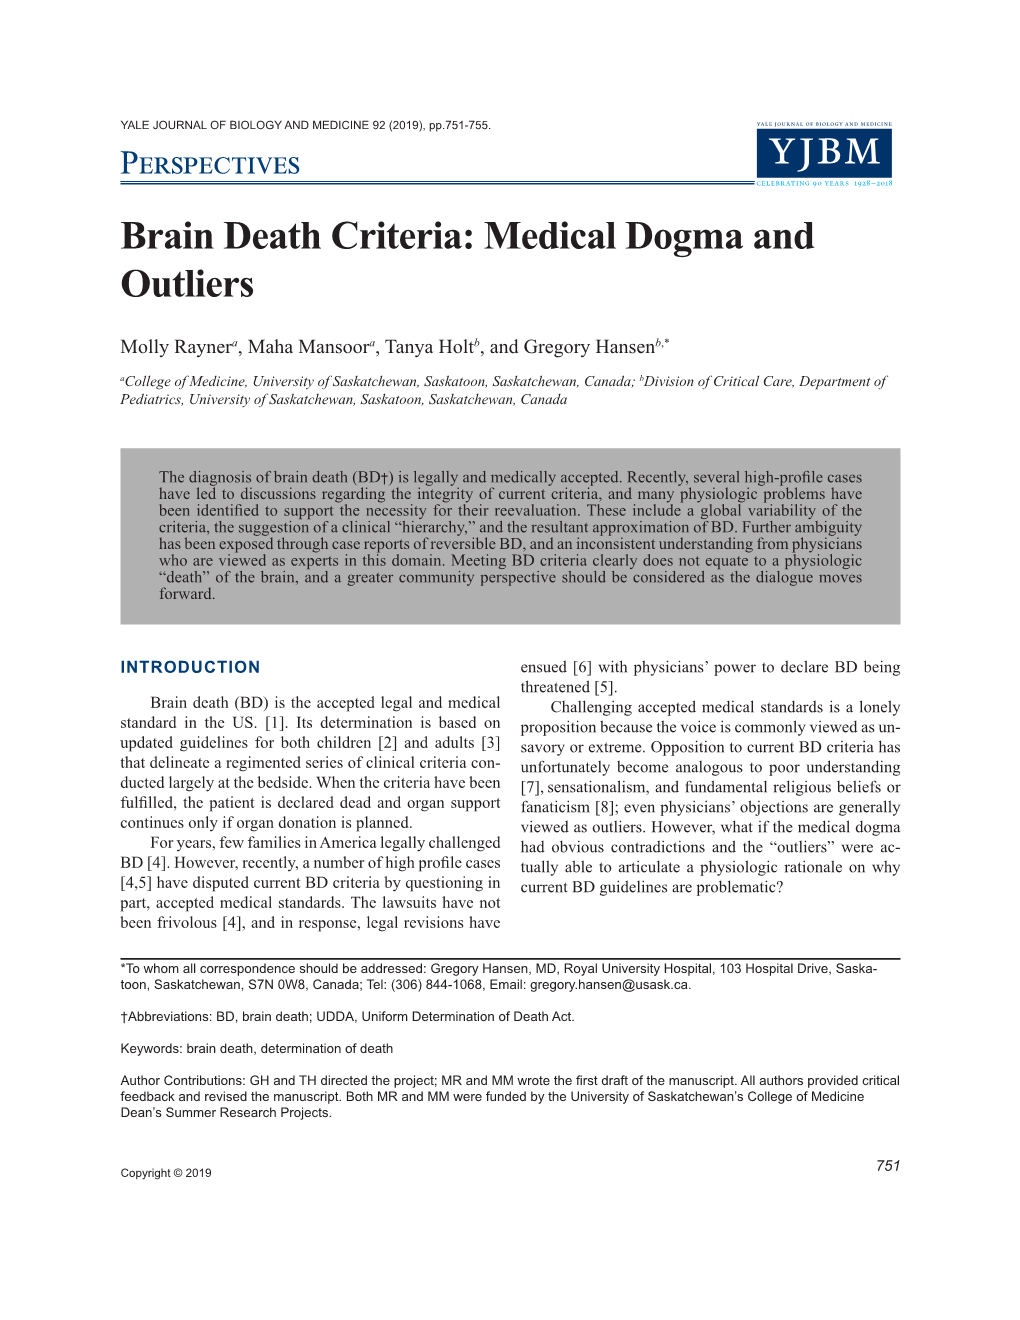 Brain Death Criteria: Medical Dogma and Outliers